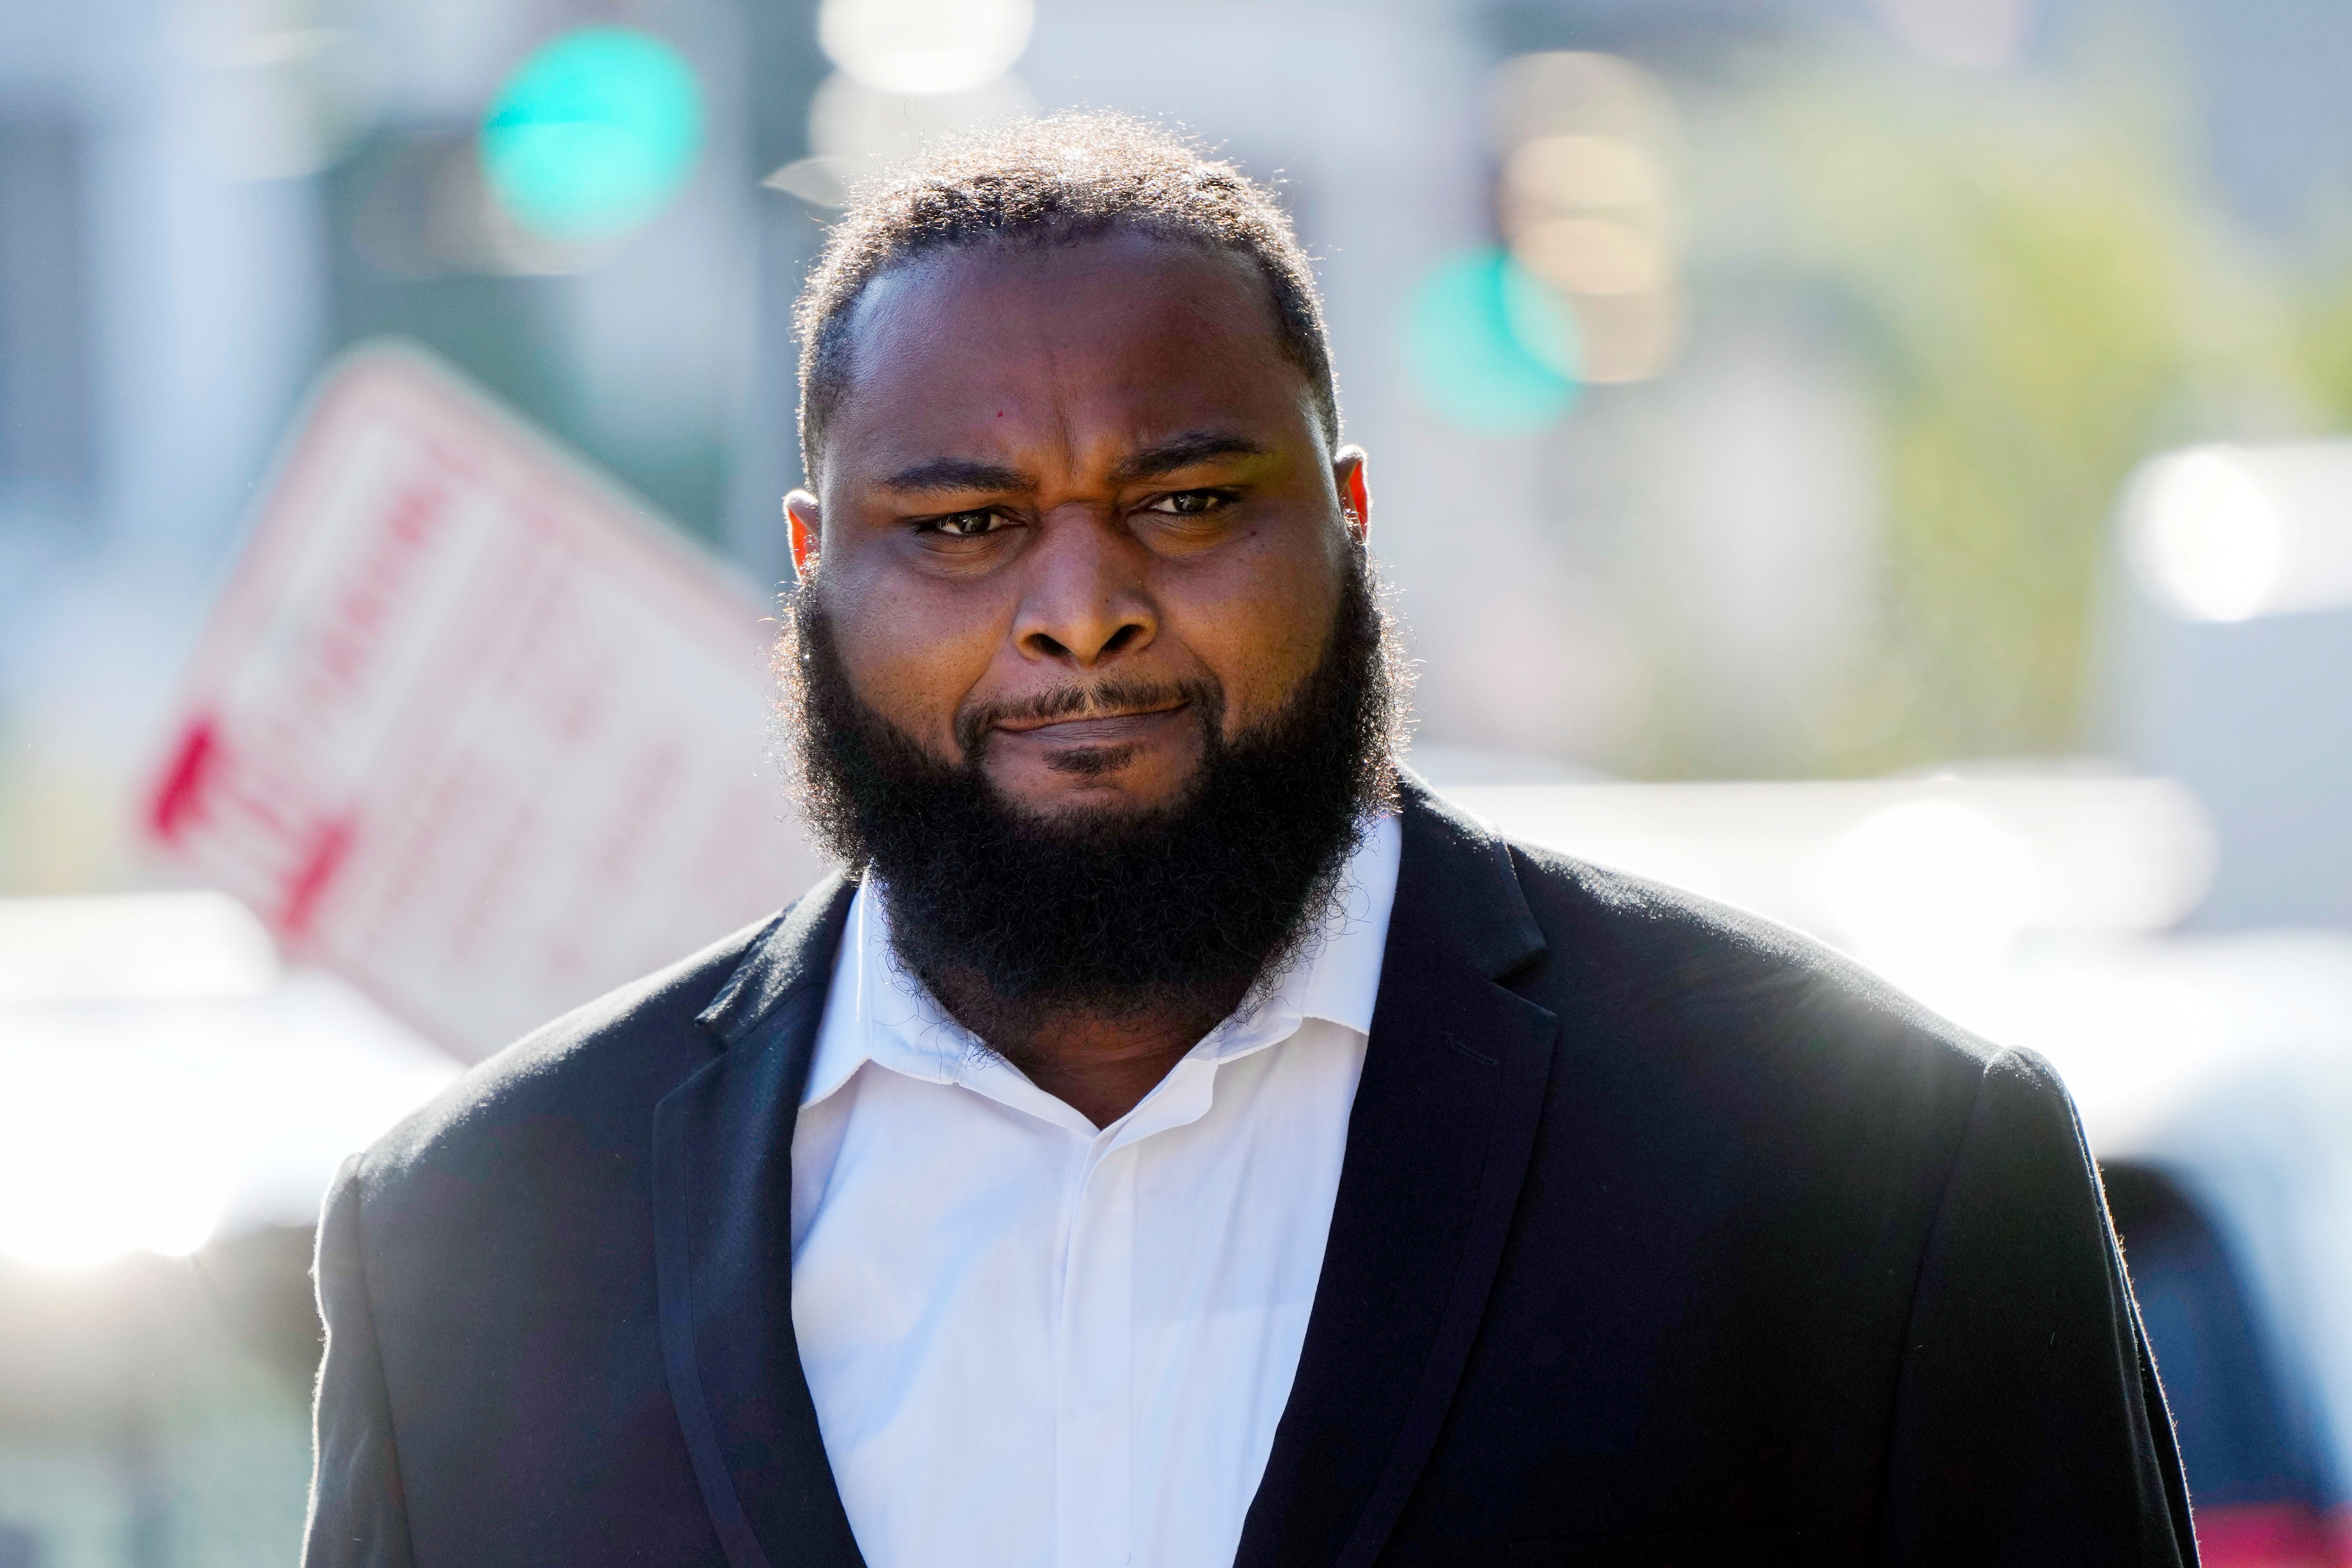 Cardell Hayes was sentenced to 25 years in prison for the shooting death of NFL star Will Smith